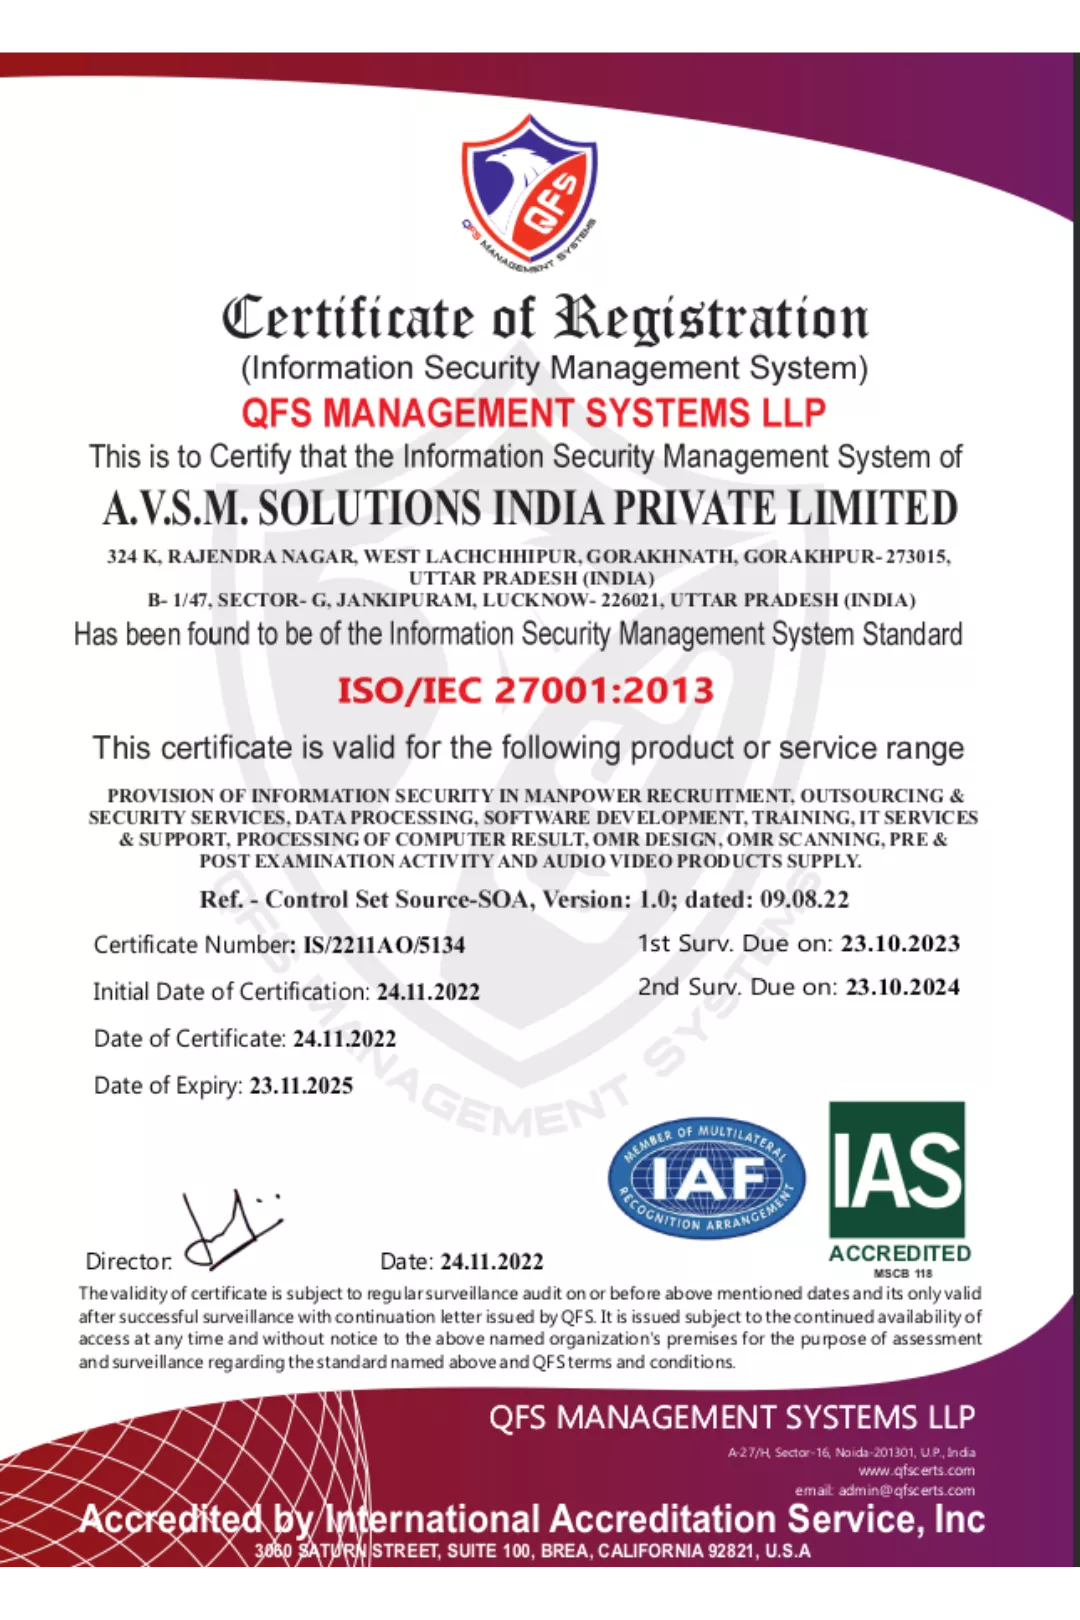 AVSM SOLUTIONS CERTIFICATES ISO_IEC 27001_2013